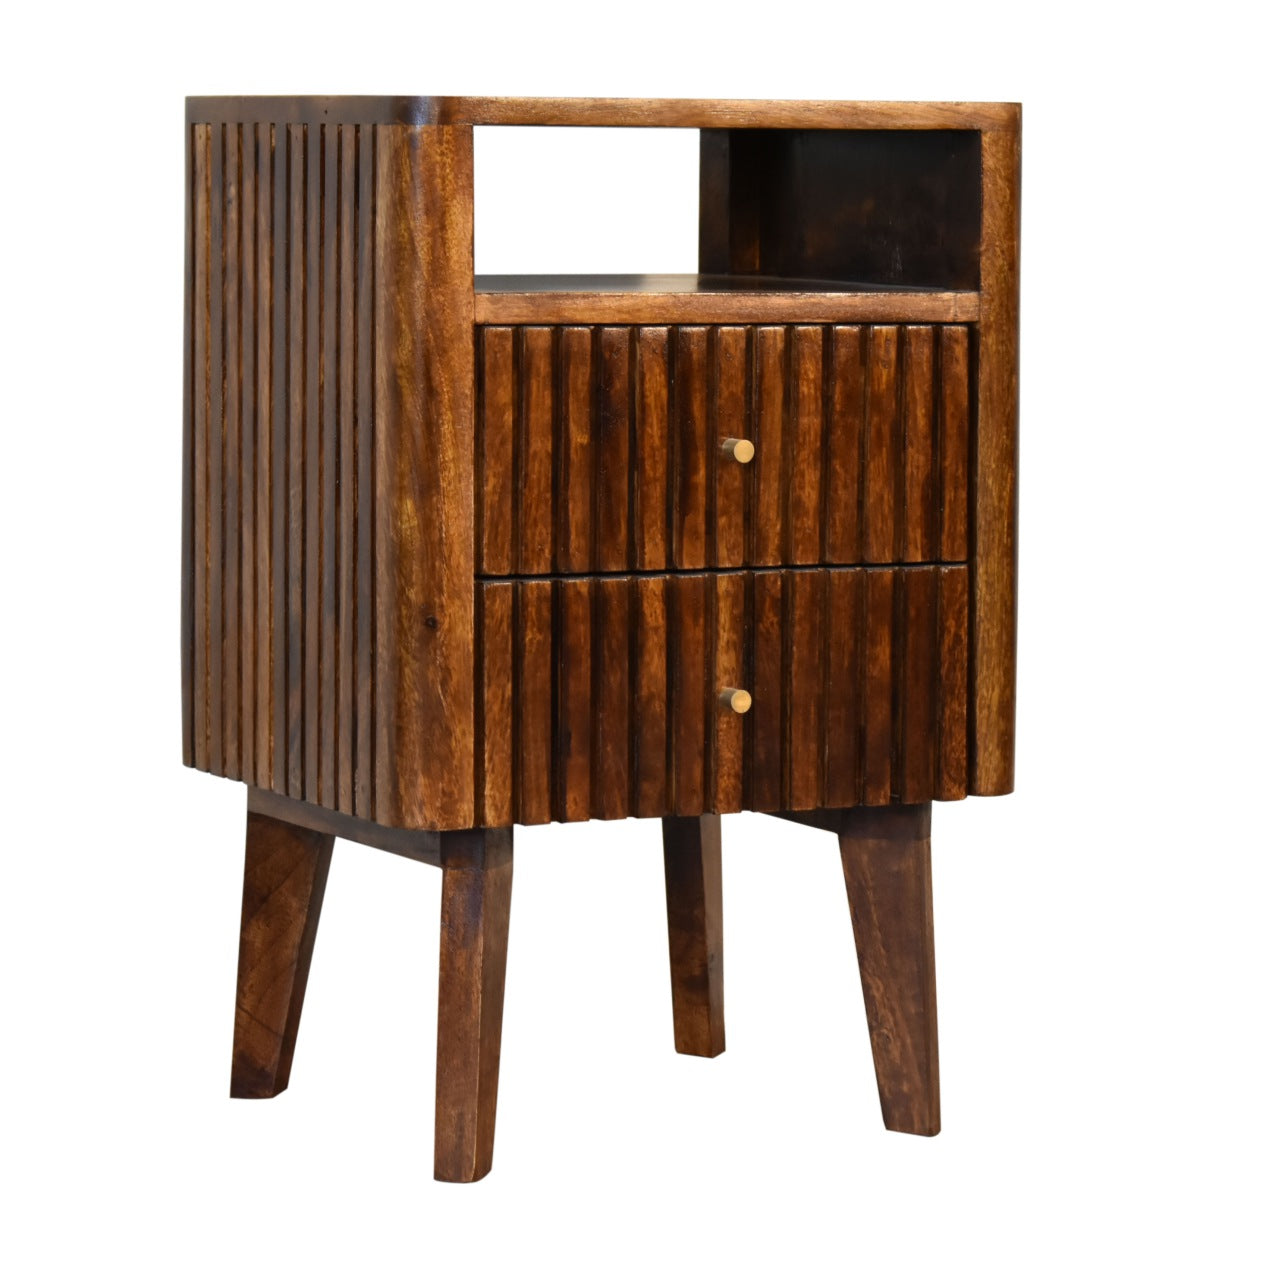 Reeve Bedside Table 2 Drawer Chest Chestnut Finish over Solid Mango Wood Nordic Style - CasaFenix